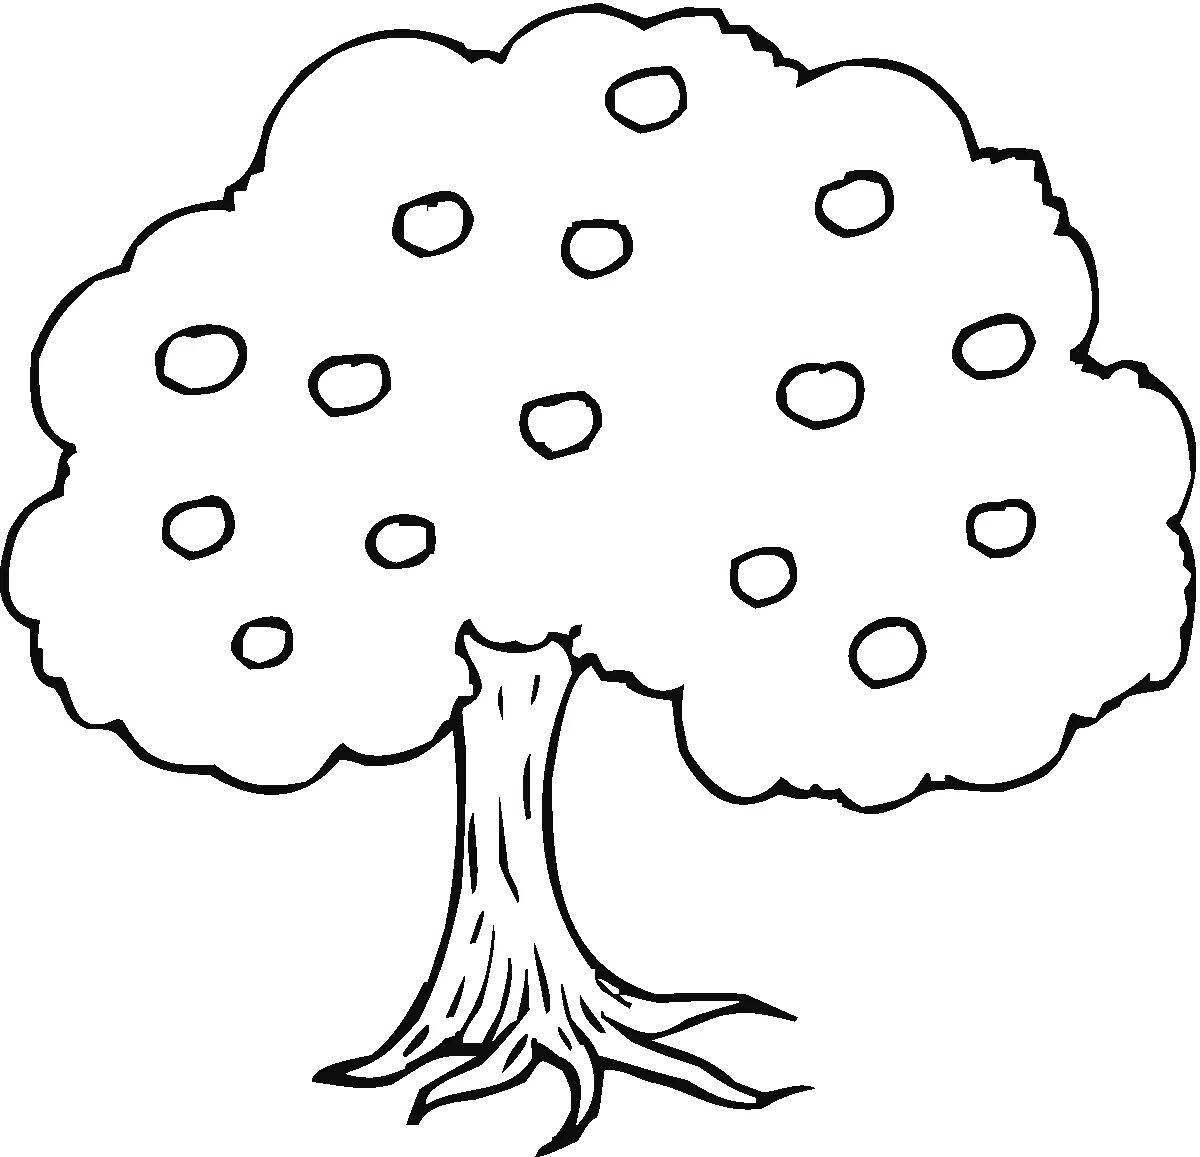 Fun tree coloring for 5-6 year olds